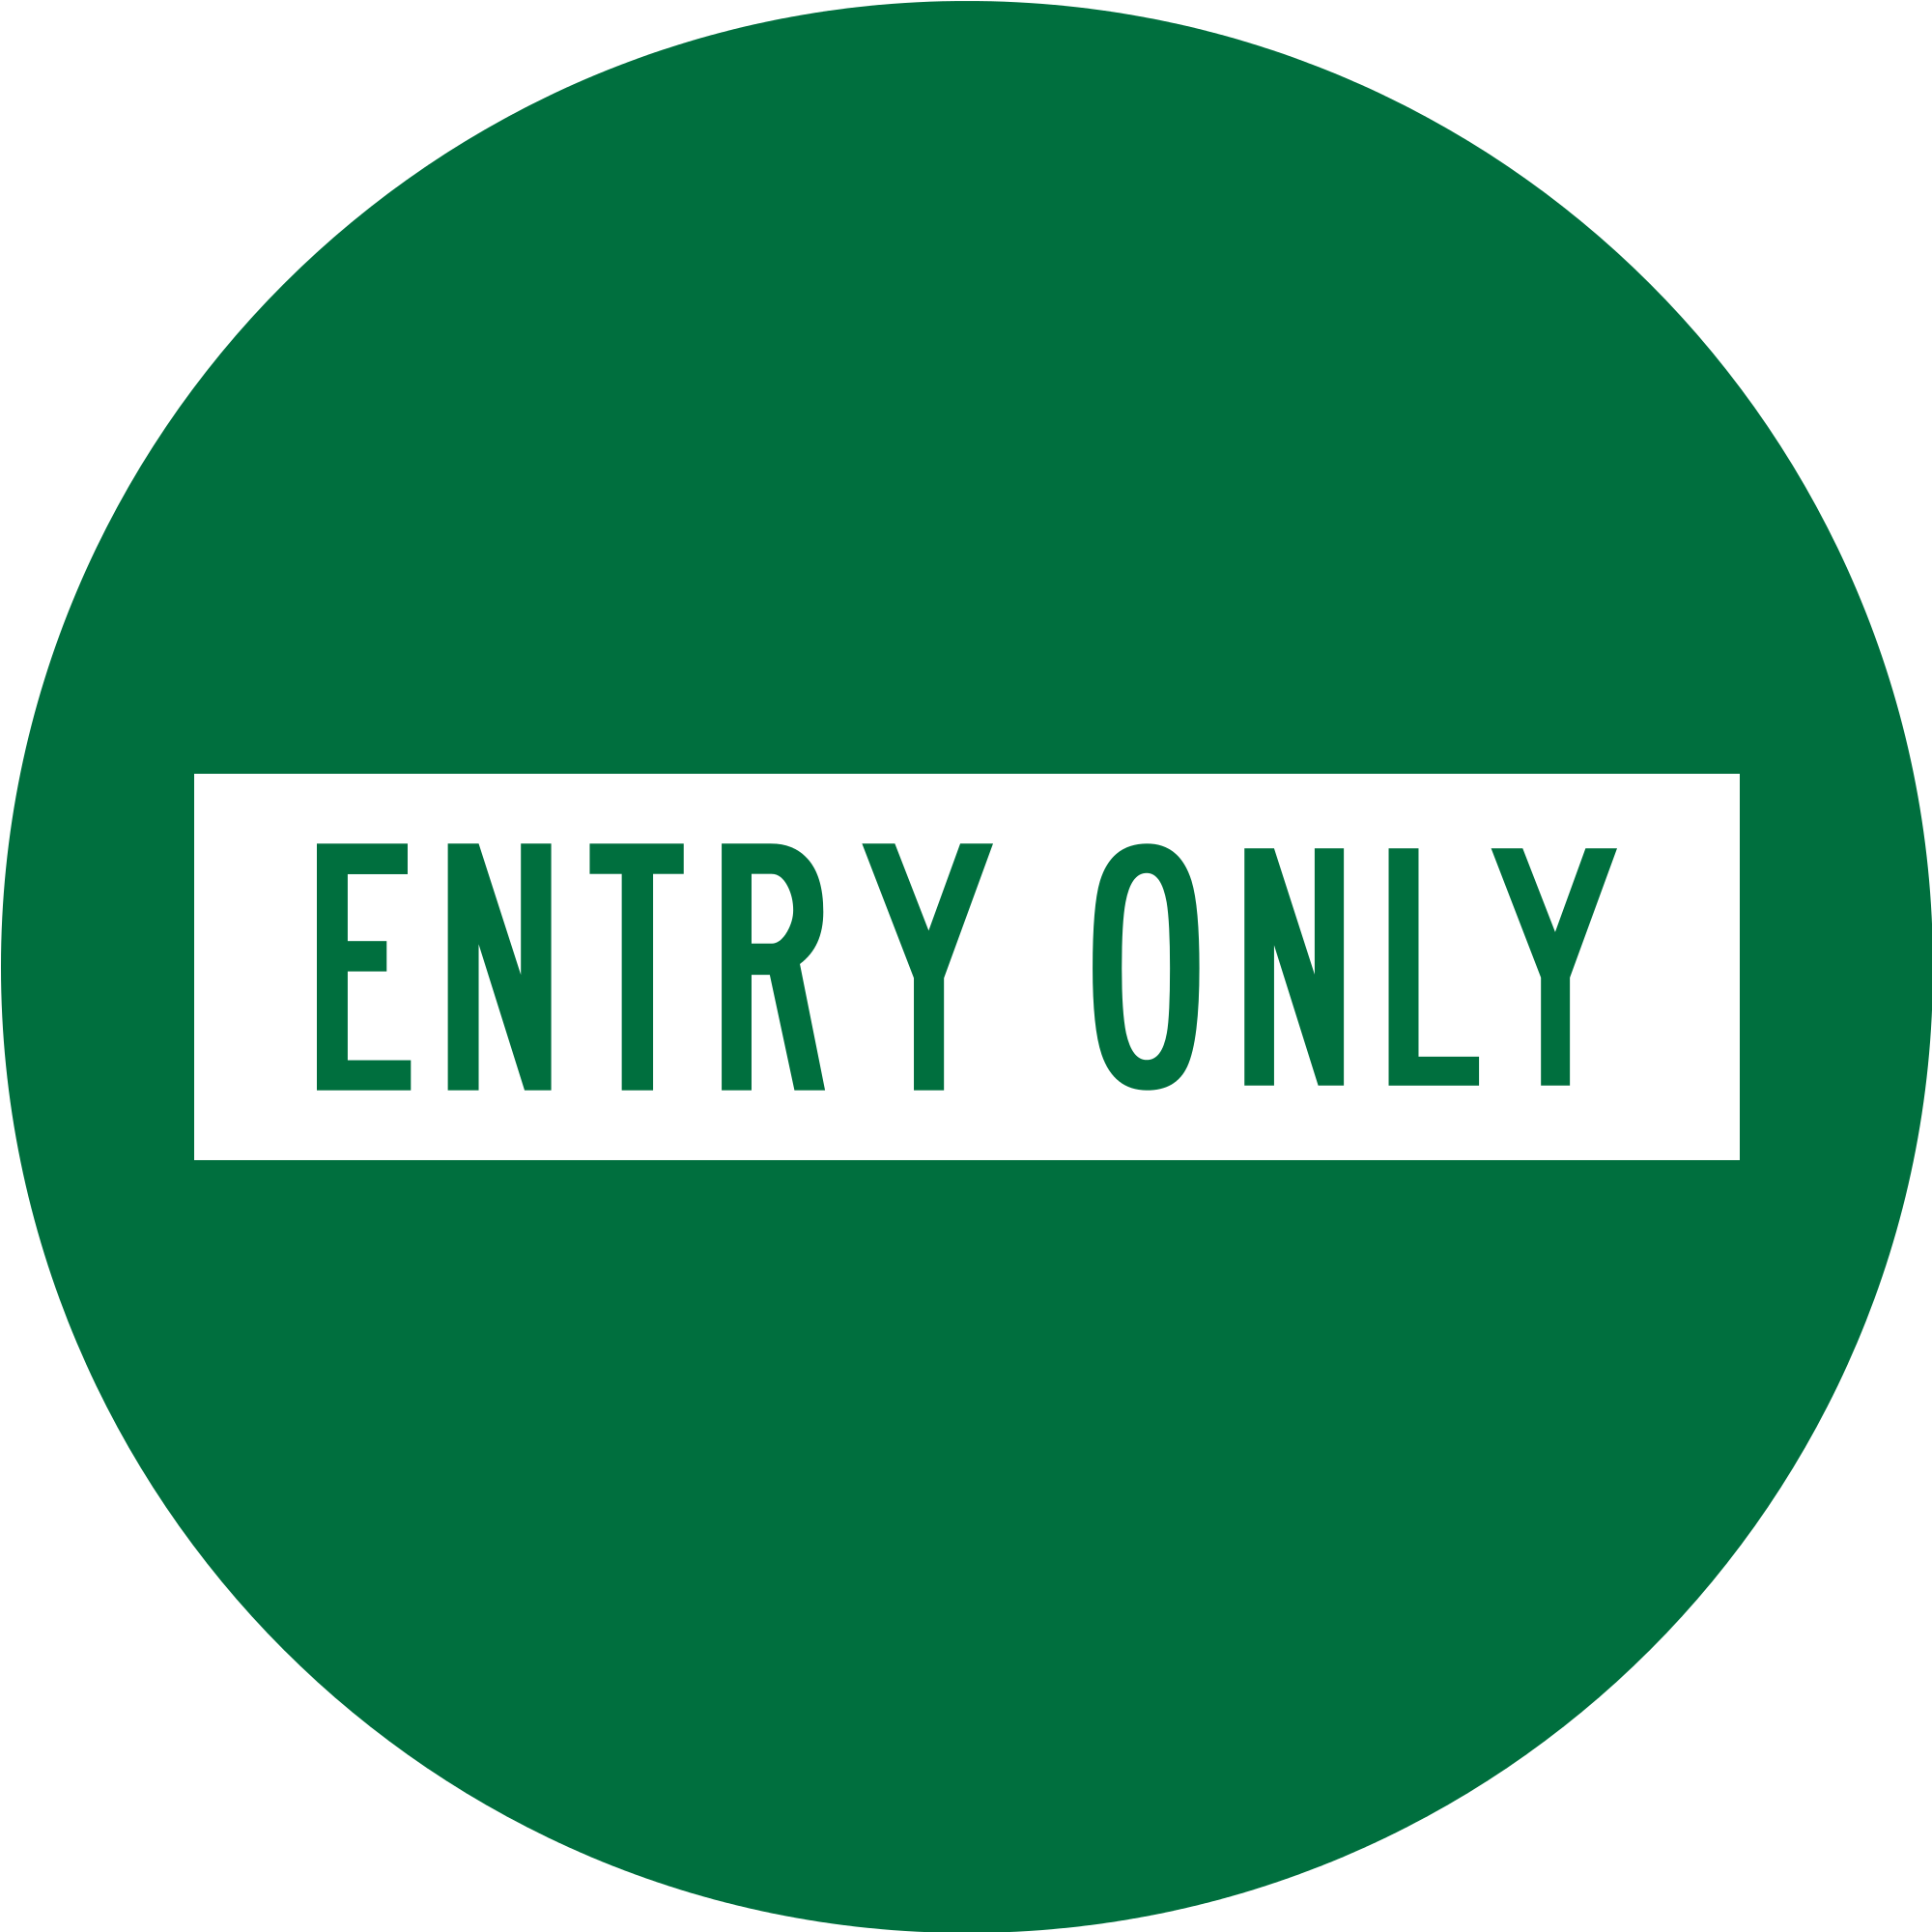 Entry PNG images Download 